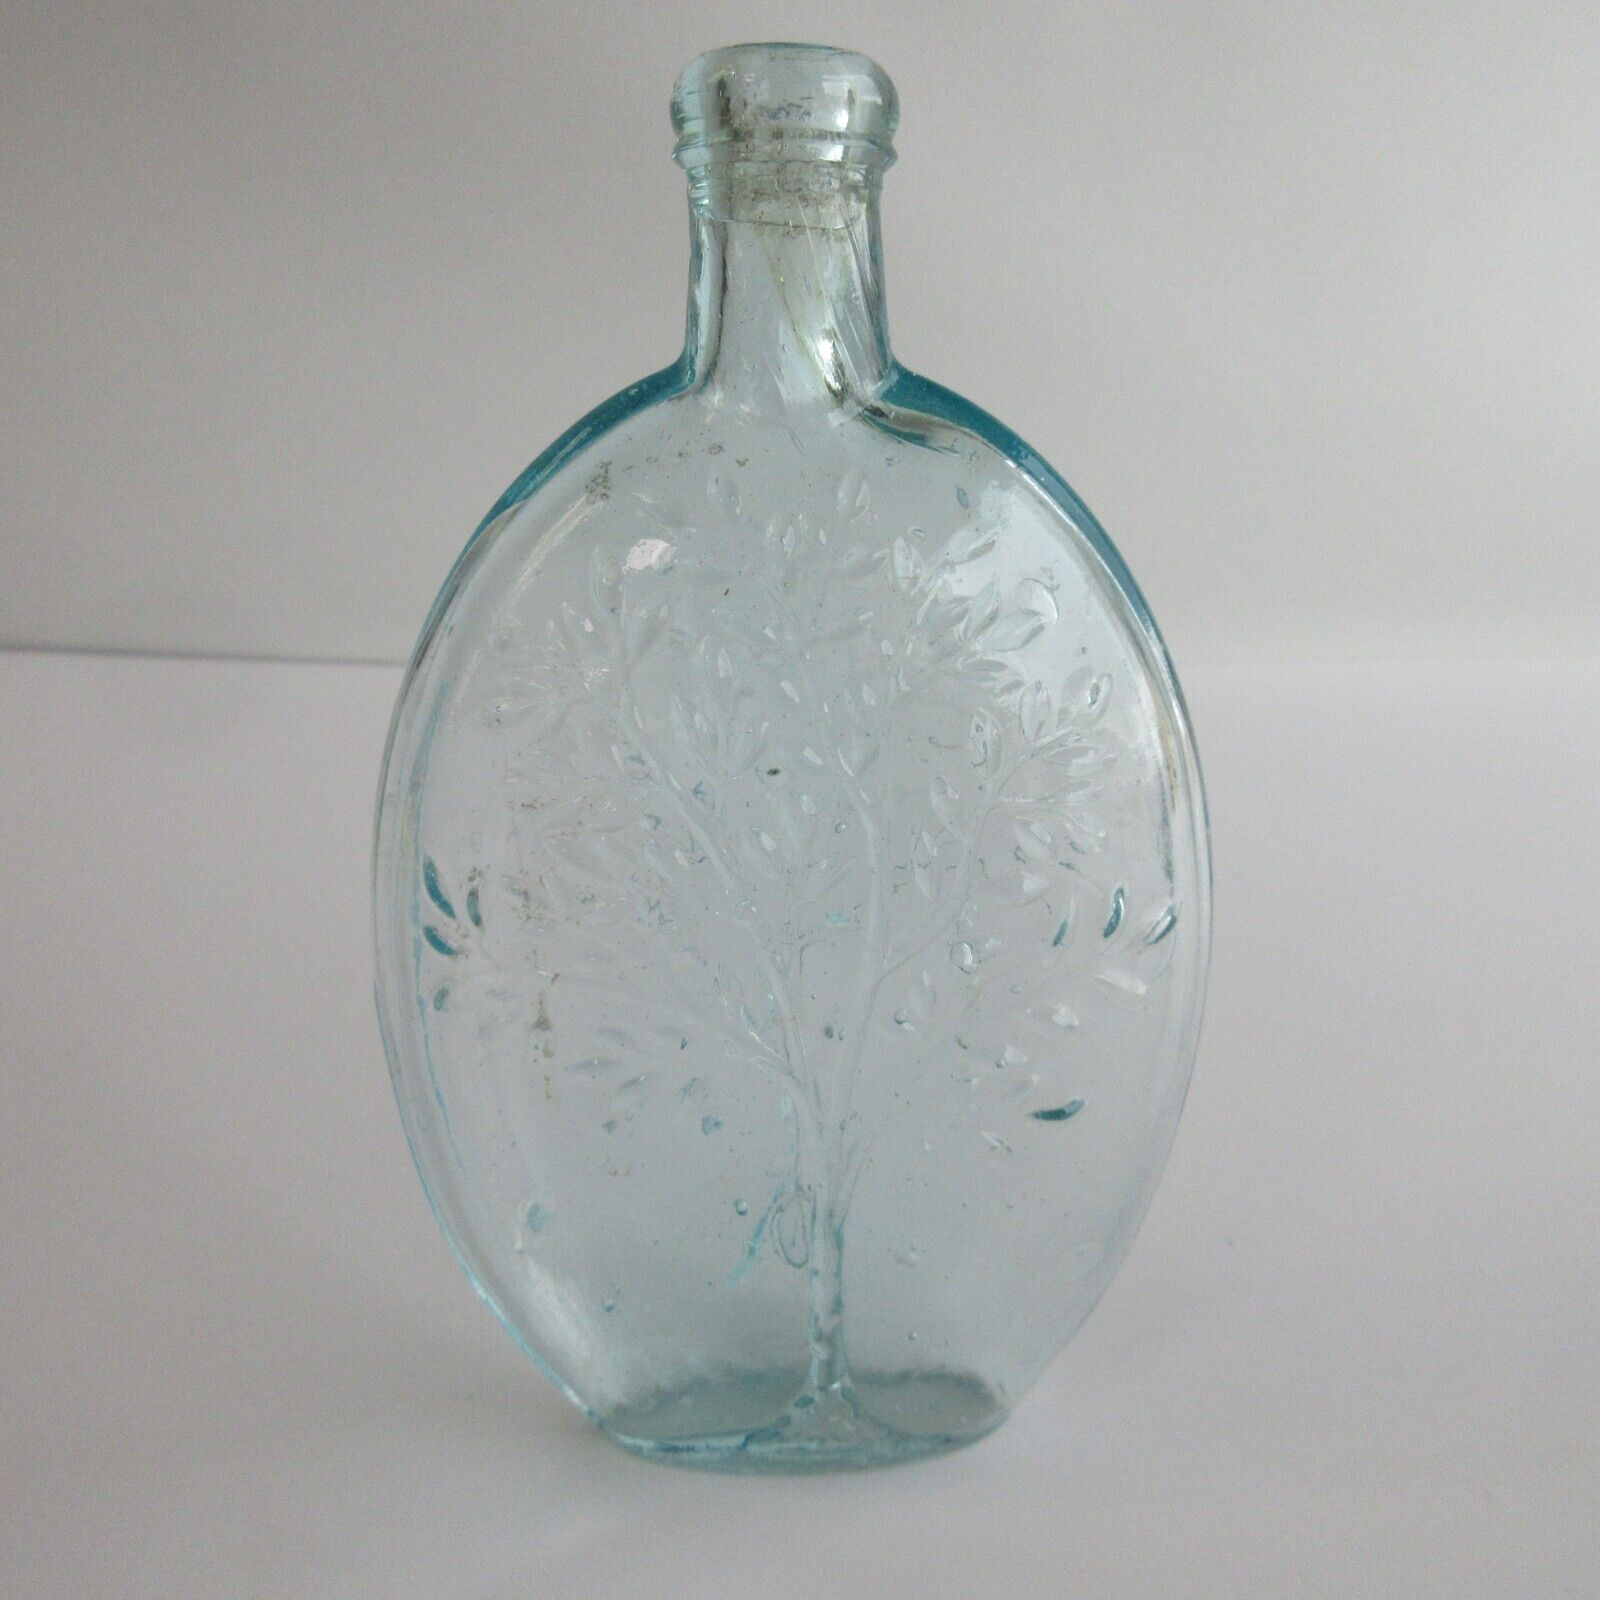 Antique Glass Summer / Winter Tree Pictorial Historical Flask Bottle